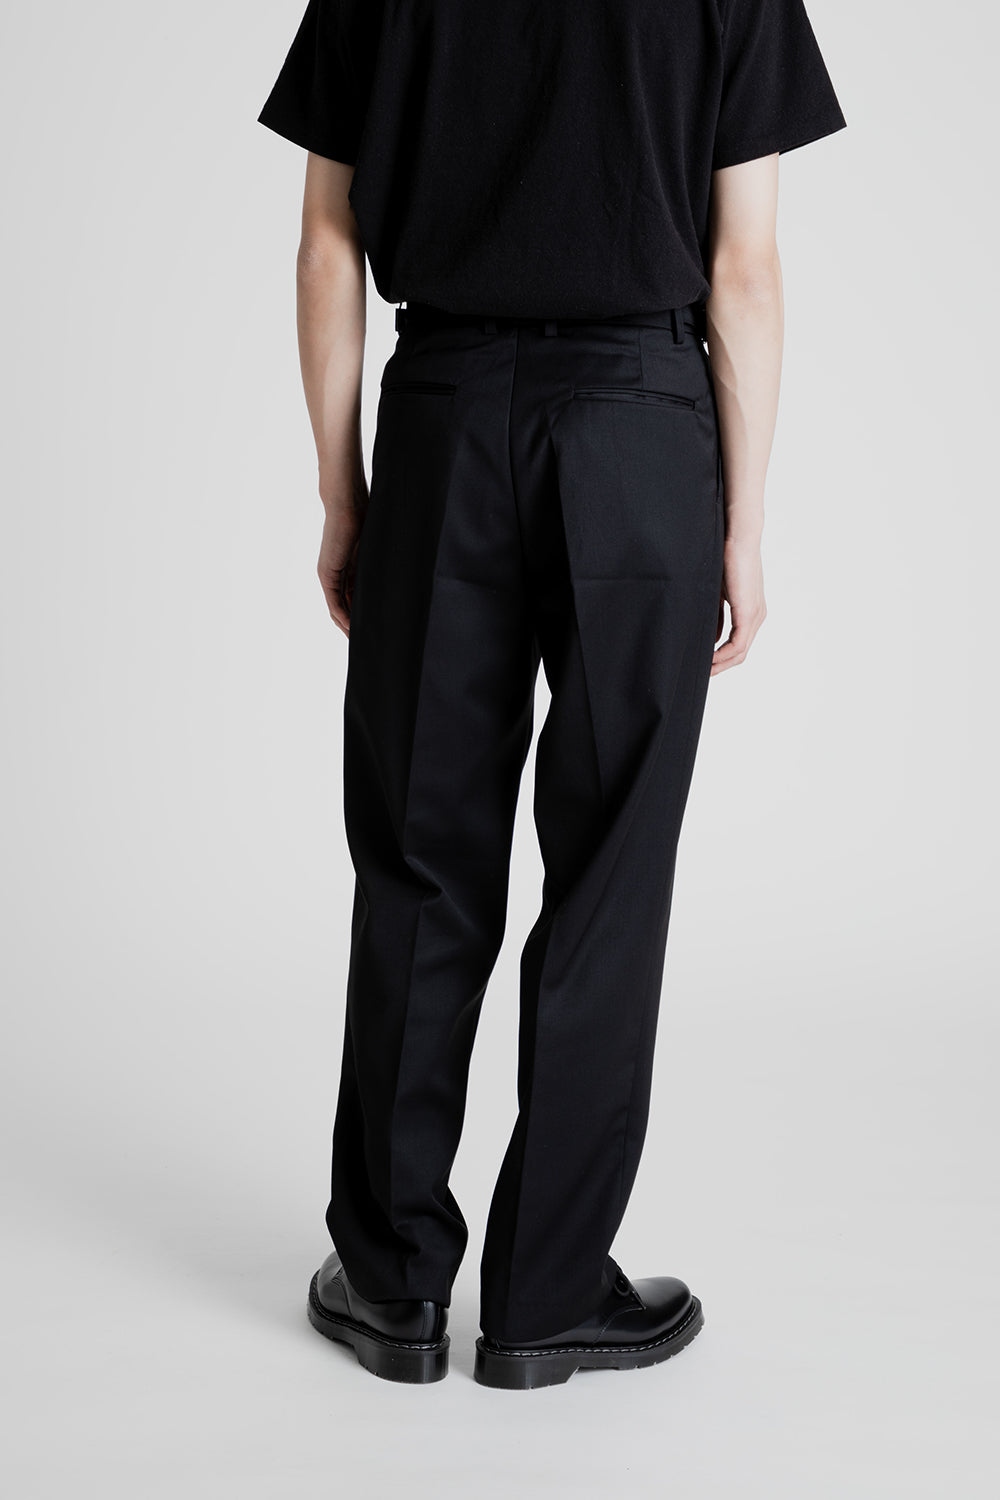 FLEX Cooling Relaxed Fit Pants - Dickies Canada